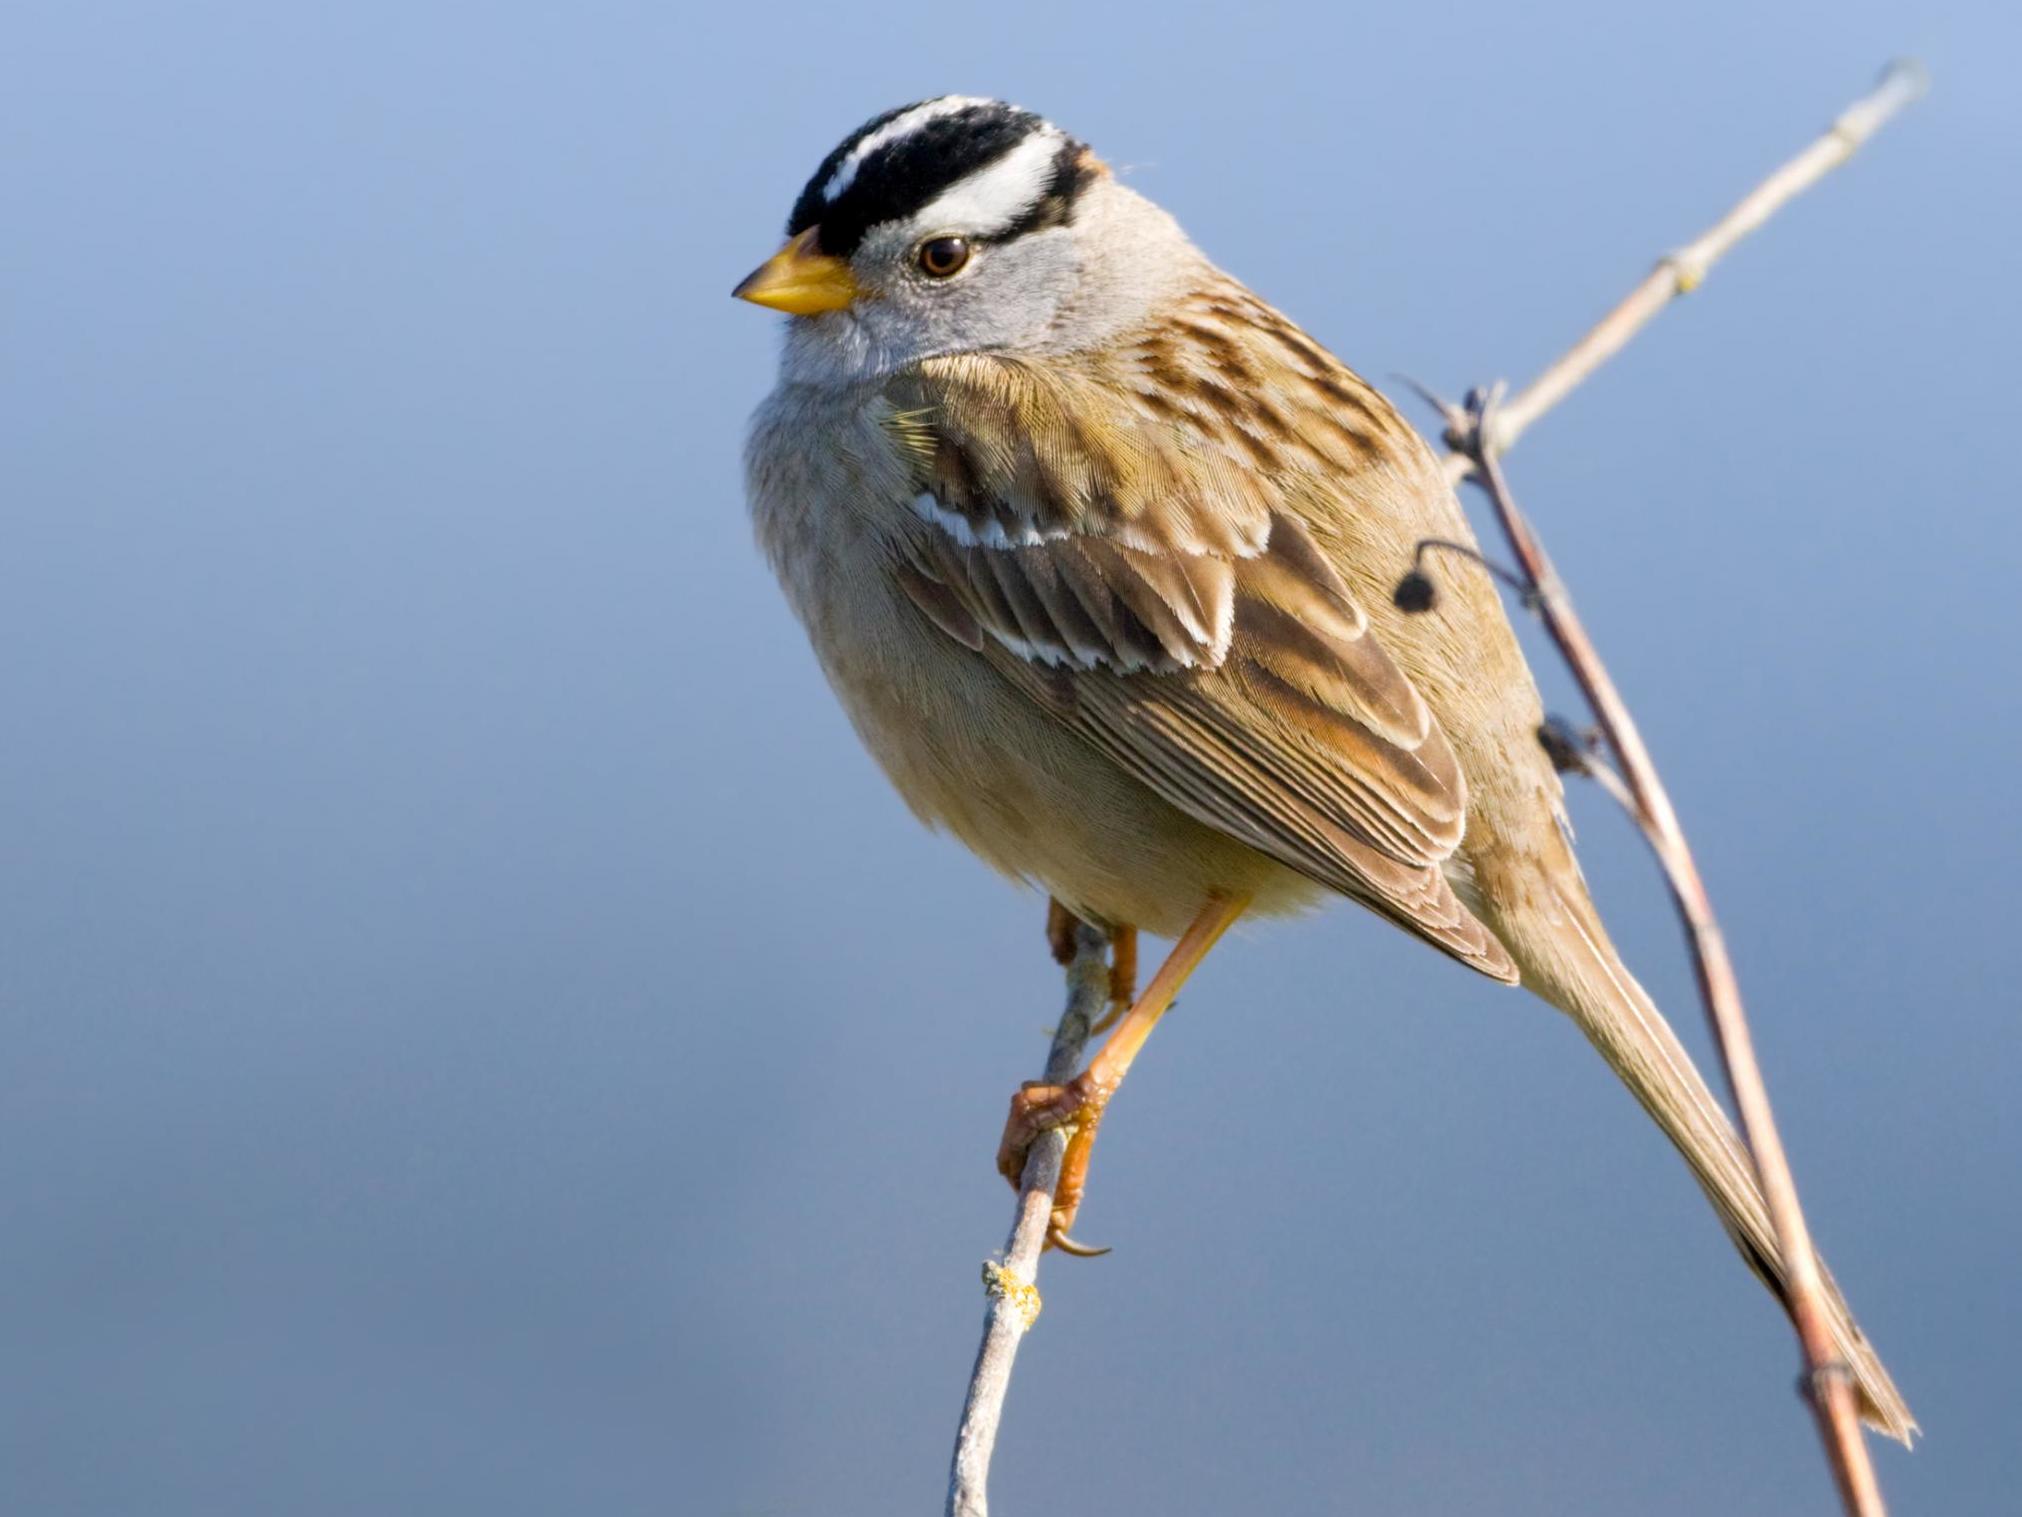 White-crowned sparrows that were given a high dose of the pesticide lost 6% of their body mass within just six hours